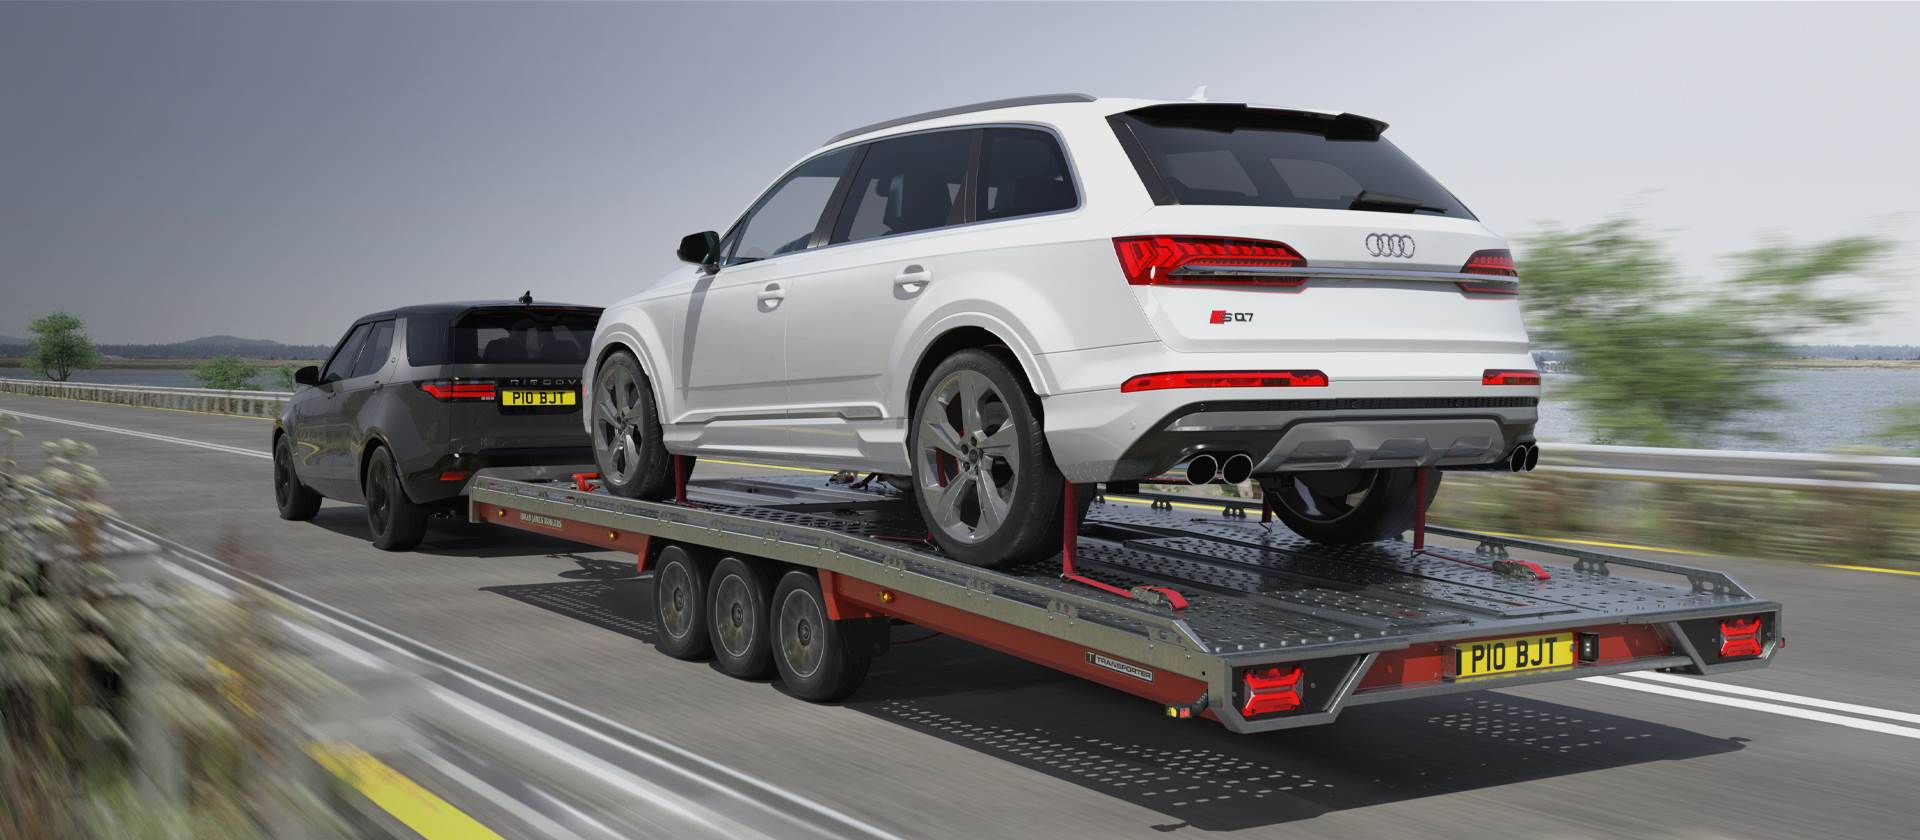 T Transporter - the professionals choice for open car trailers